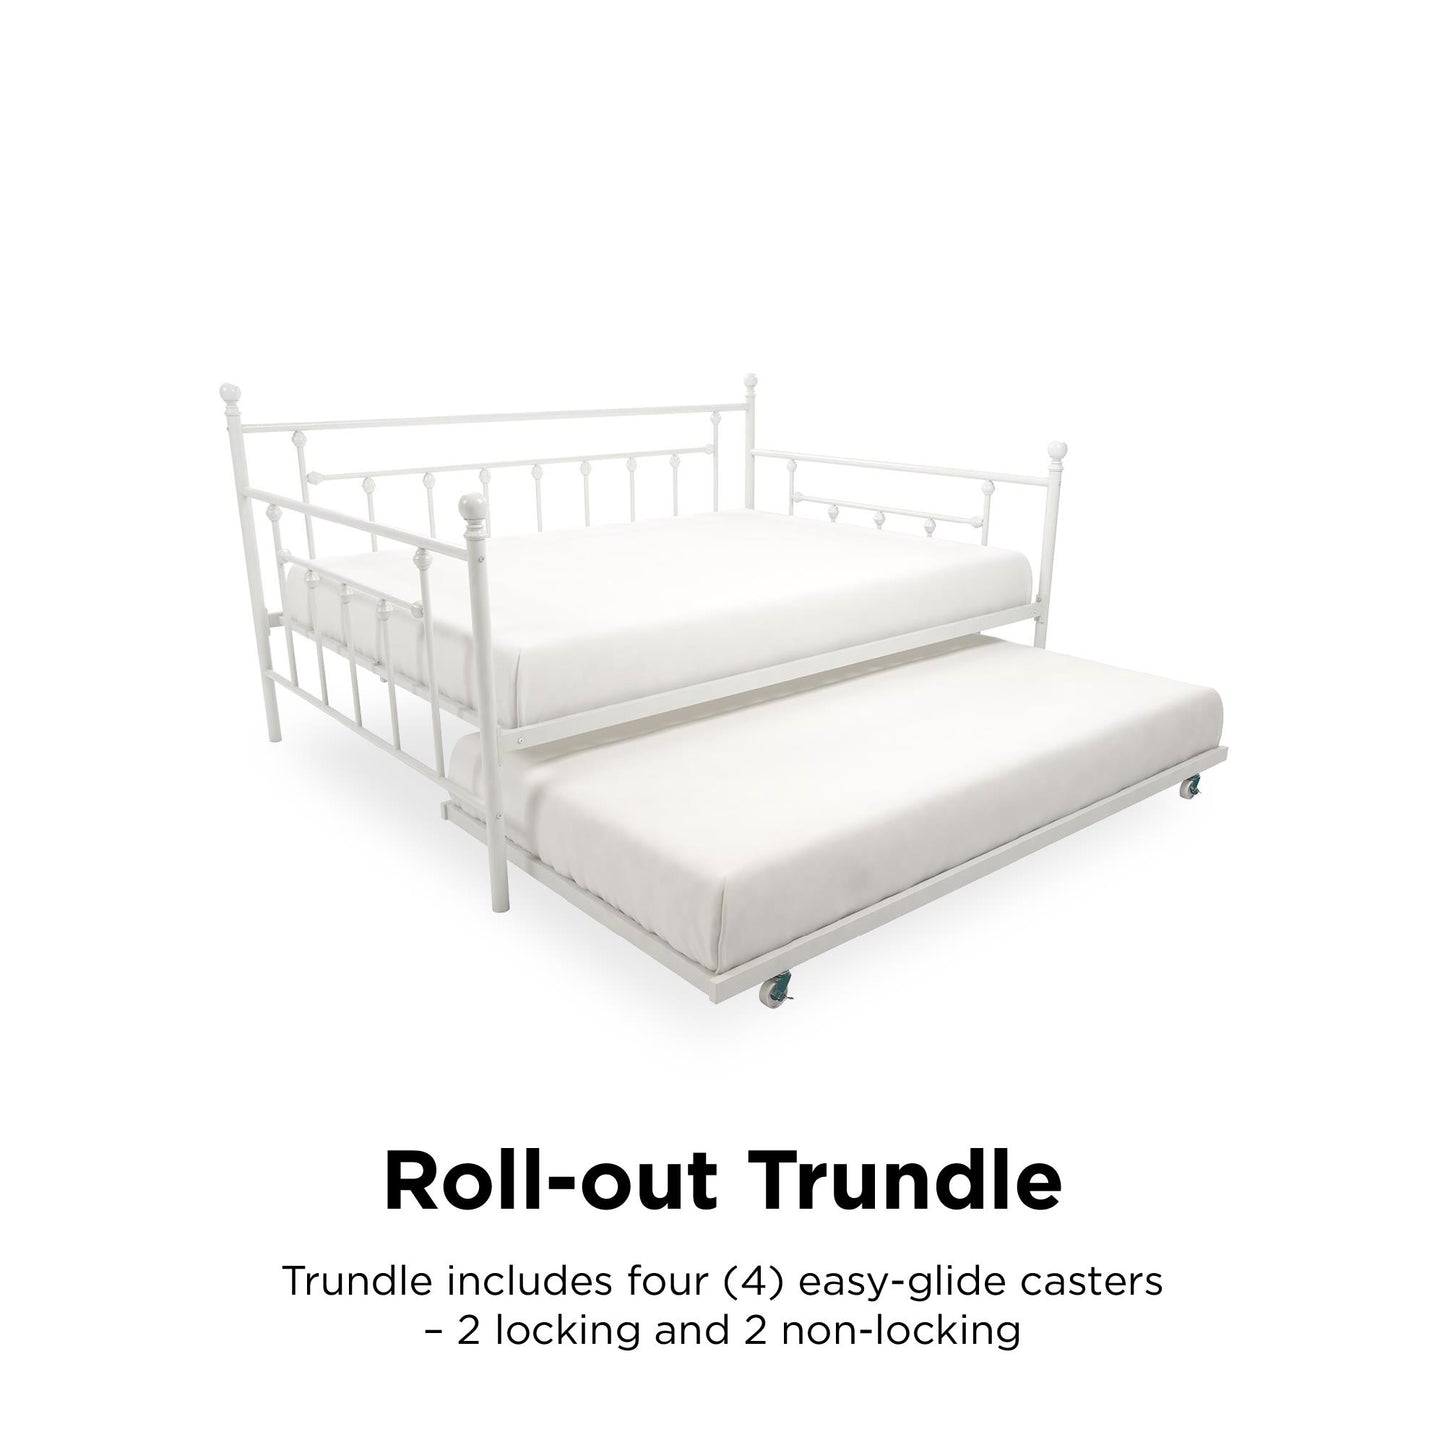 Manila Metal Daybed and Trundle Set with Sturdy Metal Frame and Slats - White - Queen